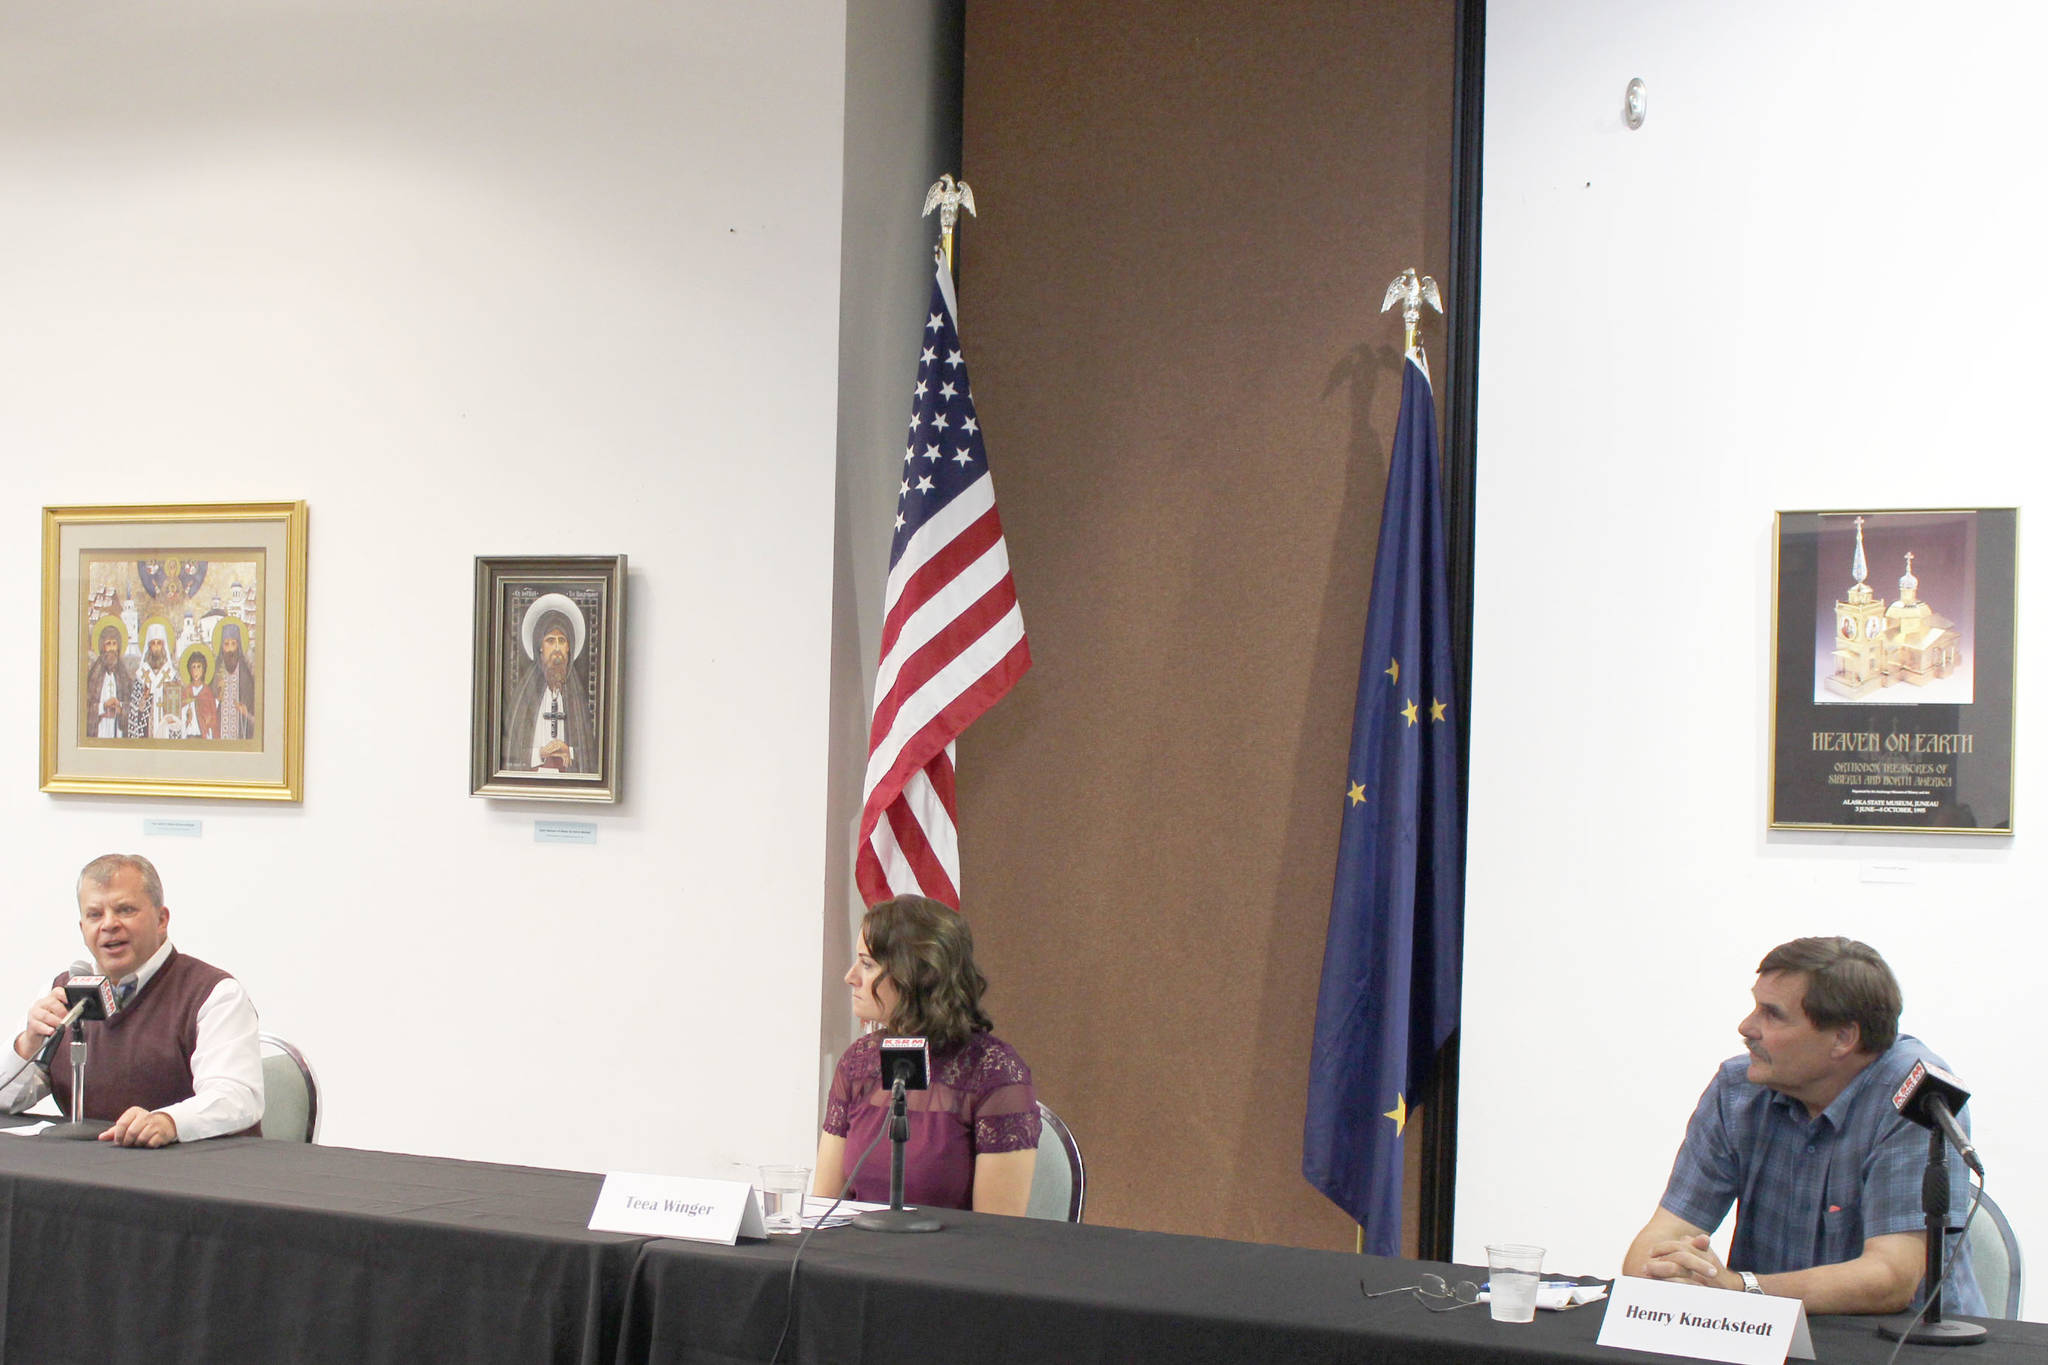 From left, Kenai City Council candidates Tim Navarre, Teea Winger and Henry Knackstedt participate in a candidate forum with the Kenai Chamber of Commerce at the Kenai Visitor and Cultural Center on Sept. 16, 2020. (Photo by Brian Mazurek/Peninsula Clarion)